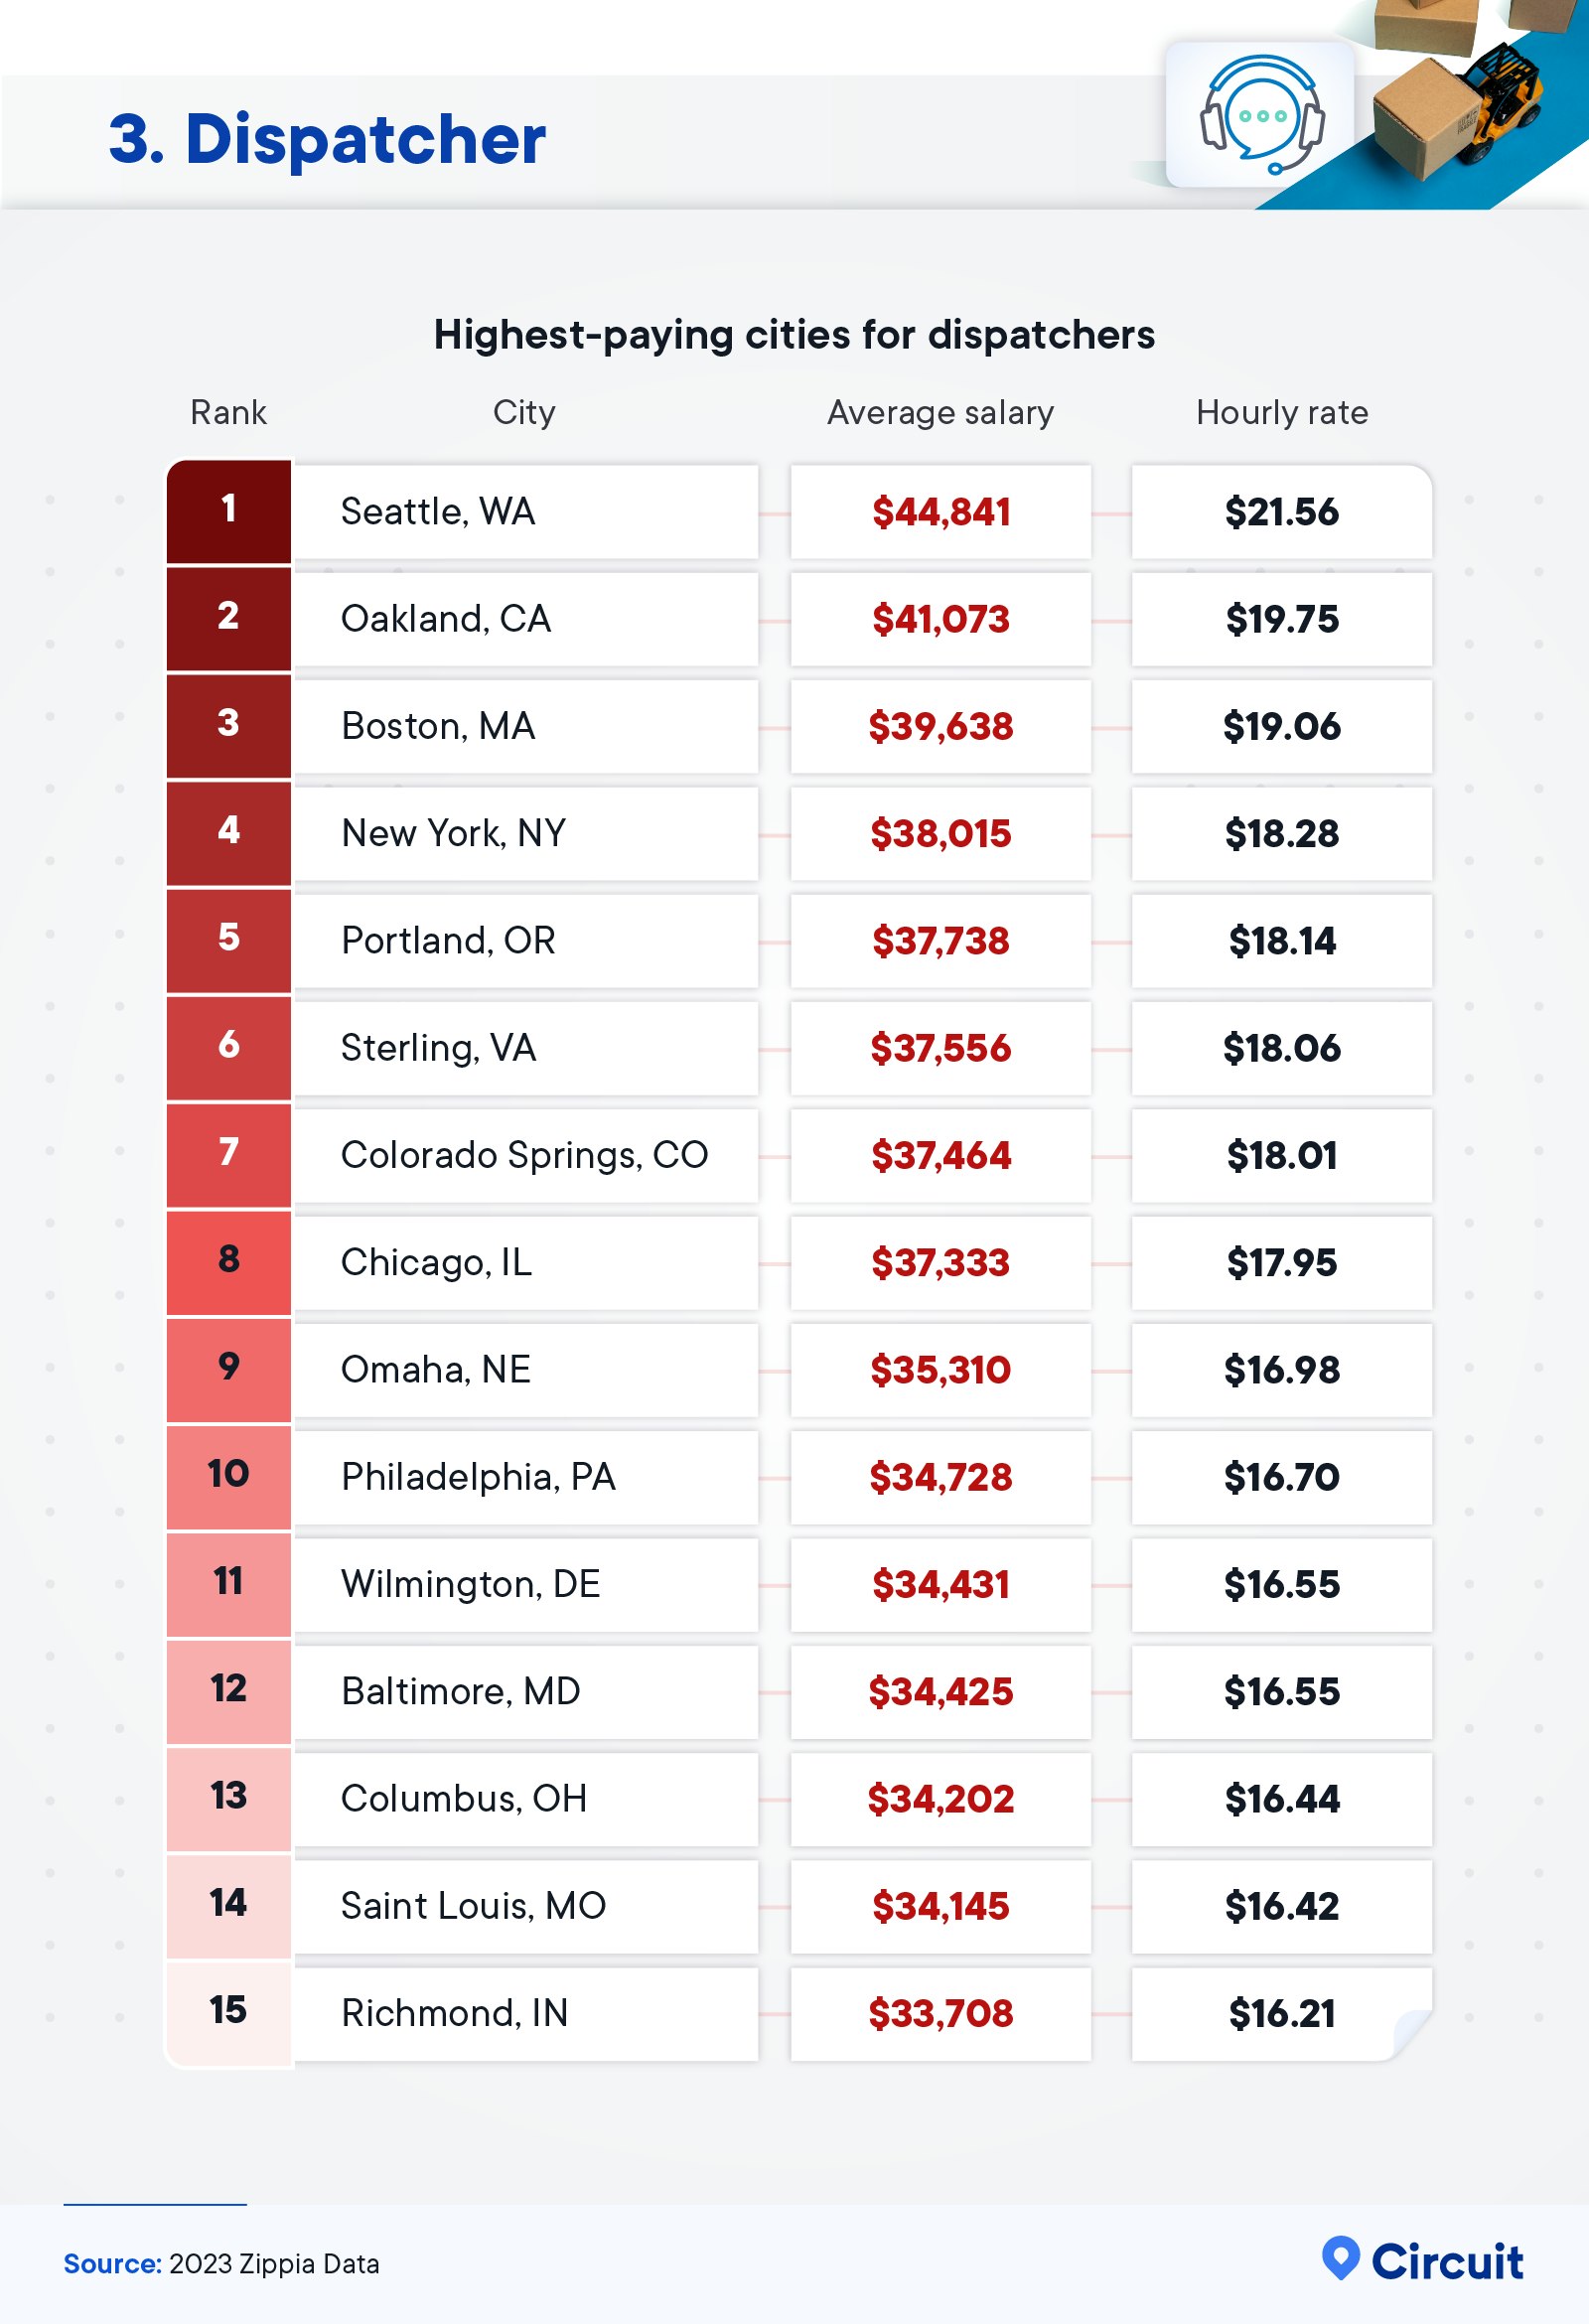 Highest-paying cities for dispatchers